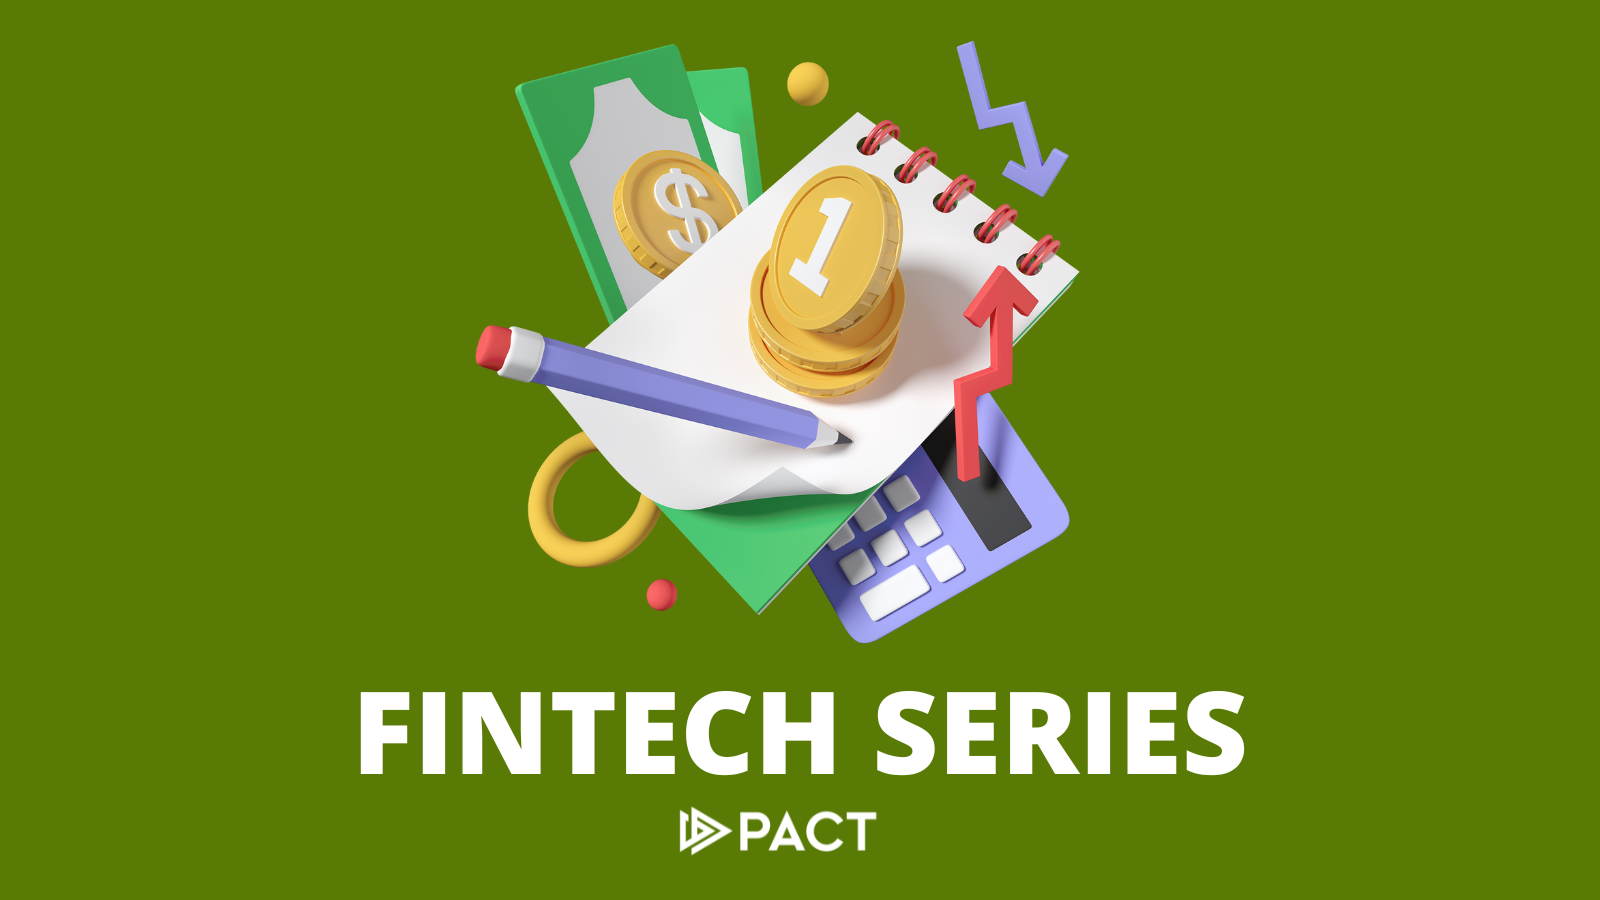 Shares the logo of the PACT FinTech series